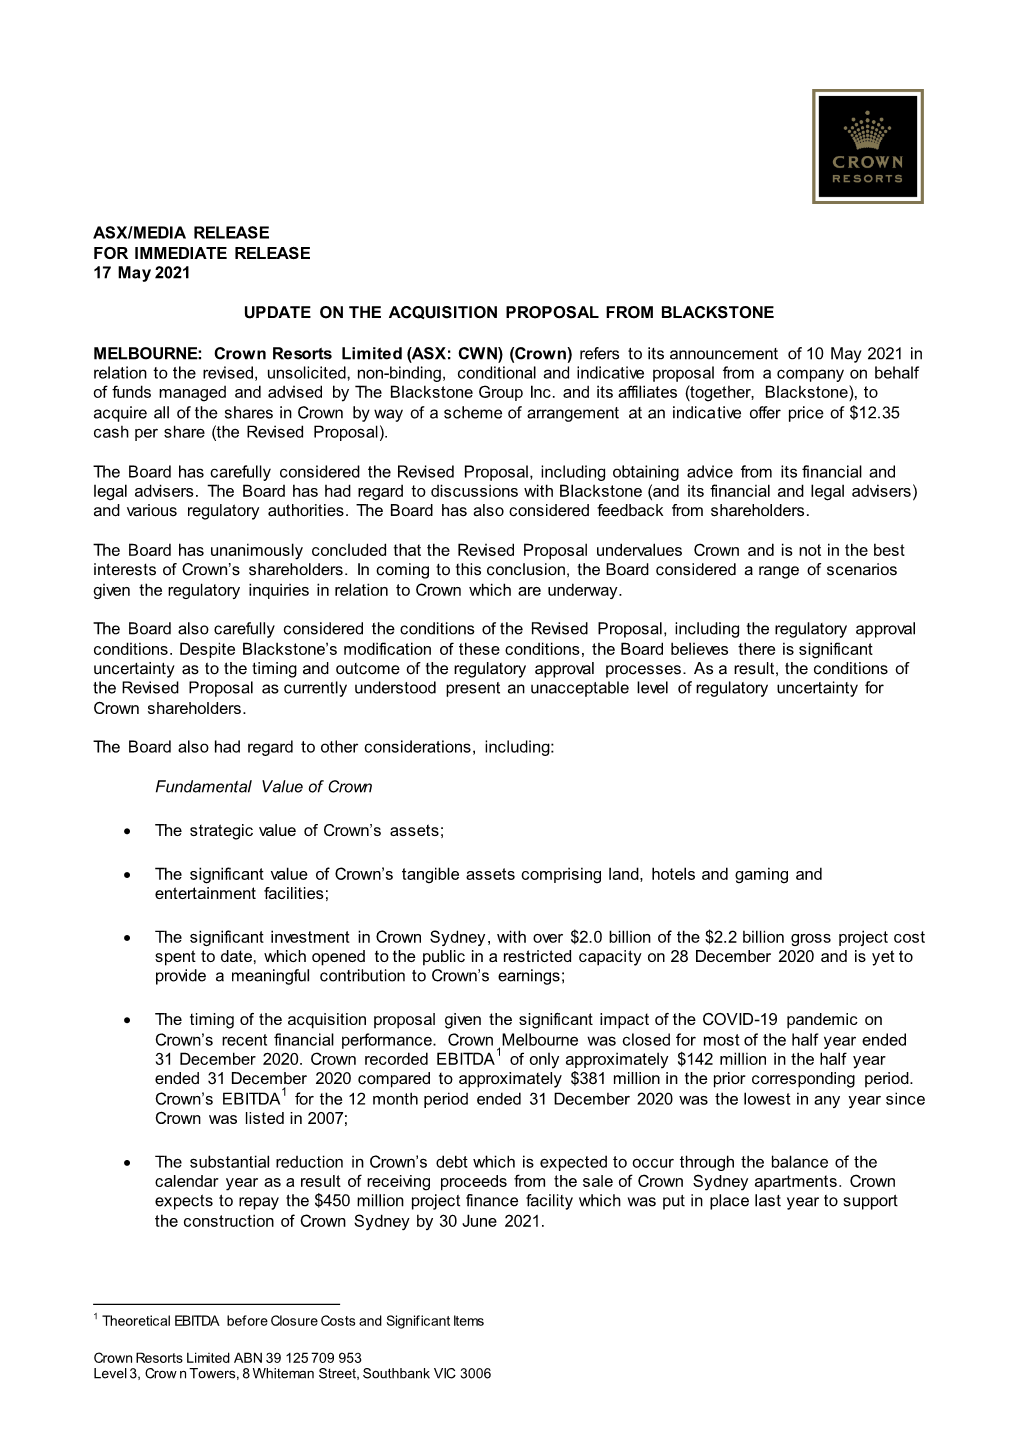 ASX/MEDIA RELEASE for IMMEDIATE RELEASE 17 May 2021 UPDATE on the ACQUISITION PROPOSAL from BLACKSTONE MELBOURNE: Crown Resorts